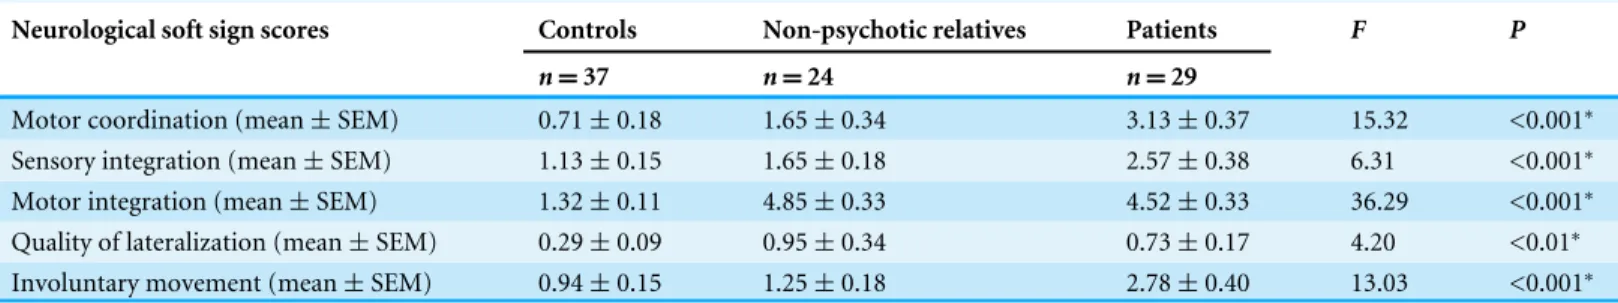 Table 3 NSS scores in controls, non-psychotic relatives and patients with schizophrenia.